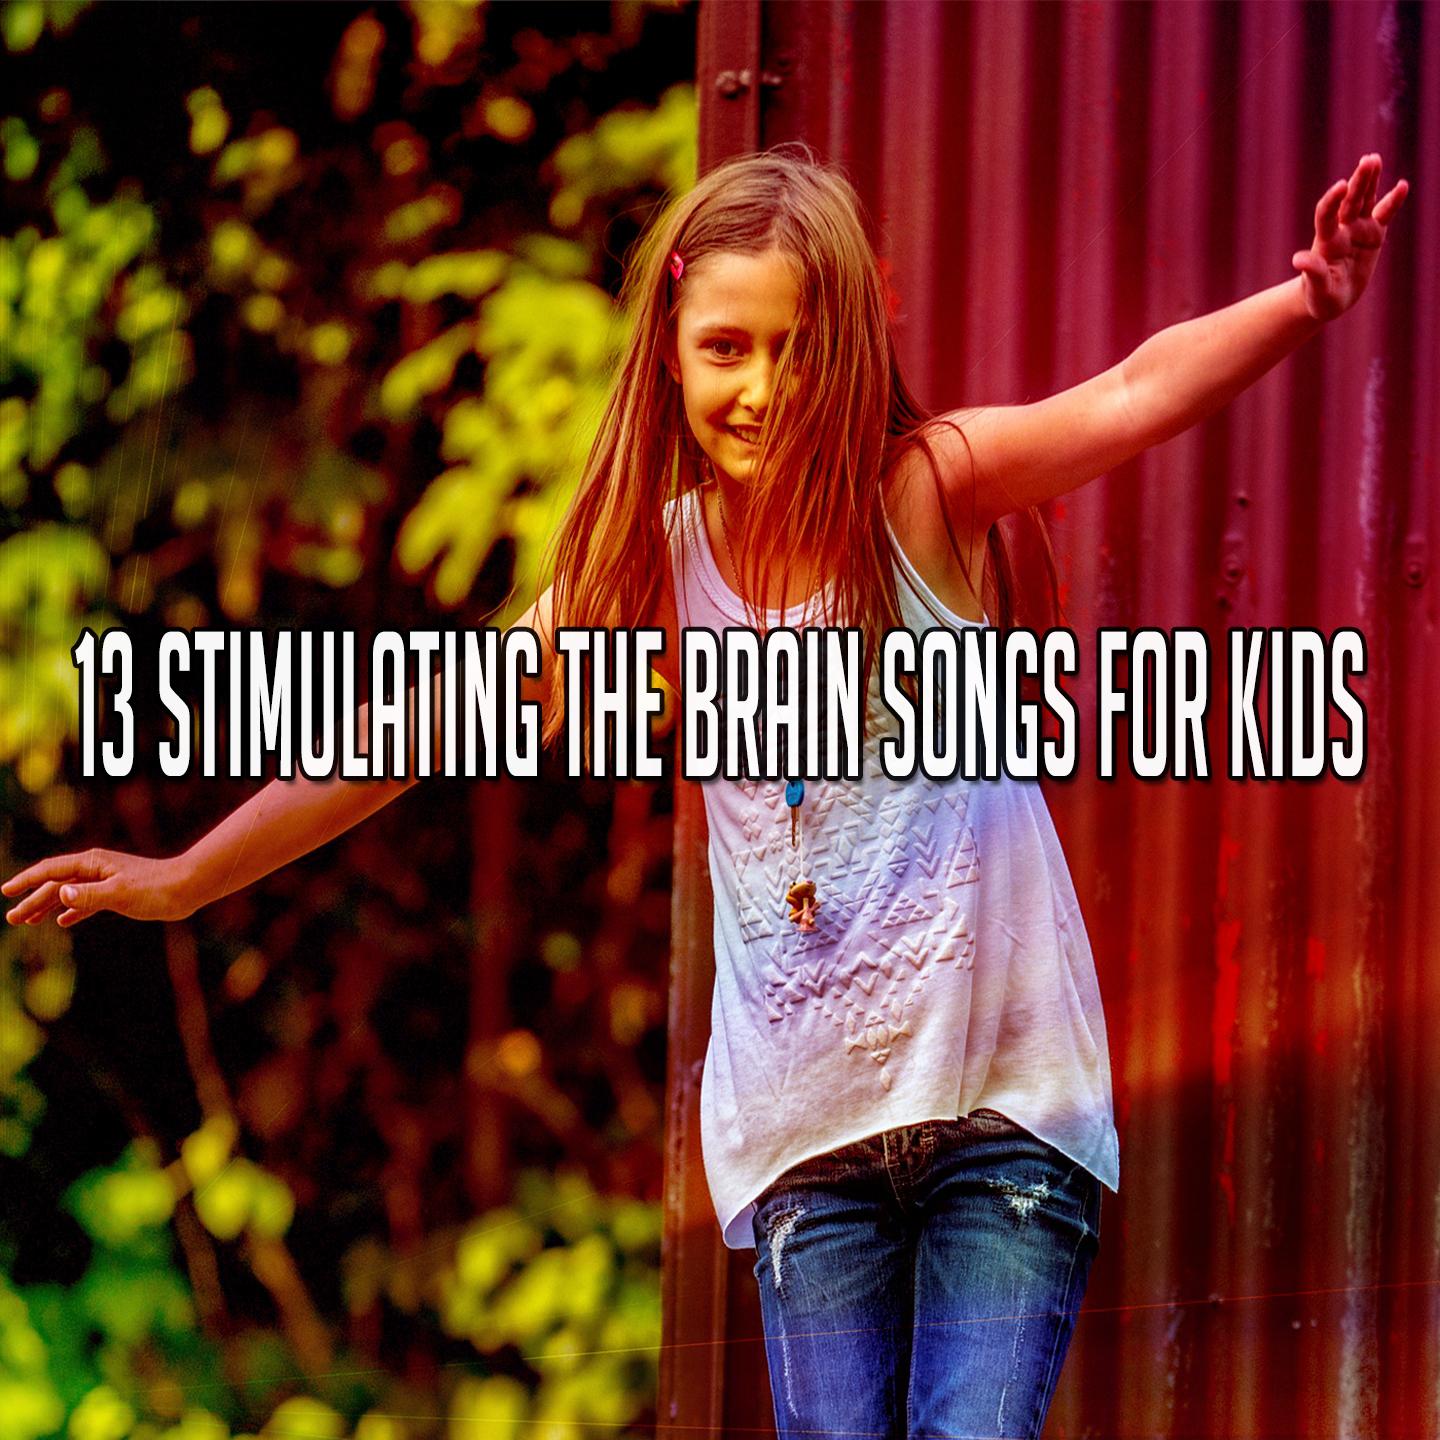 13 Stimulating the Brain Songs for Kids